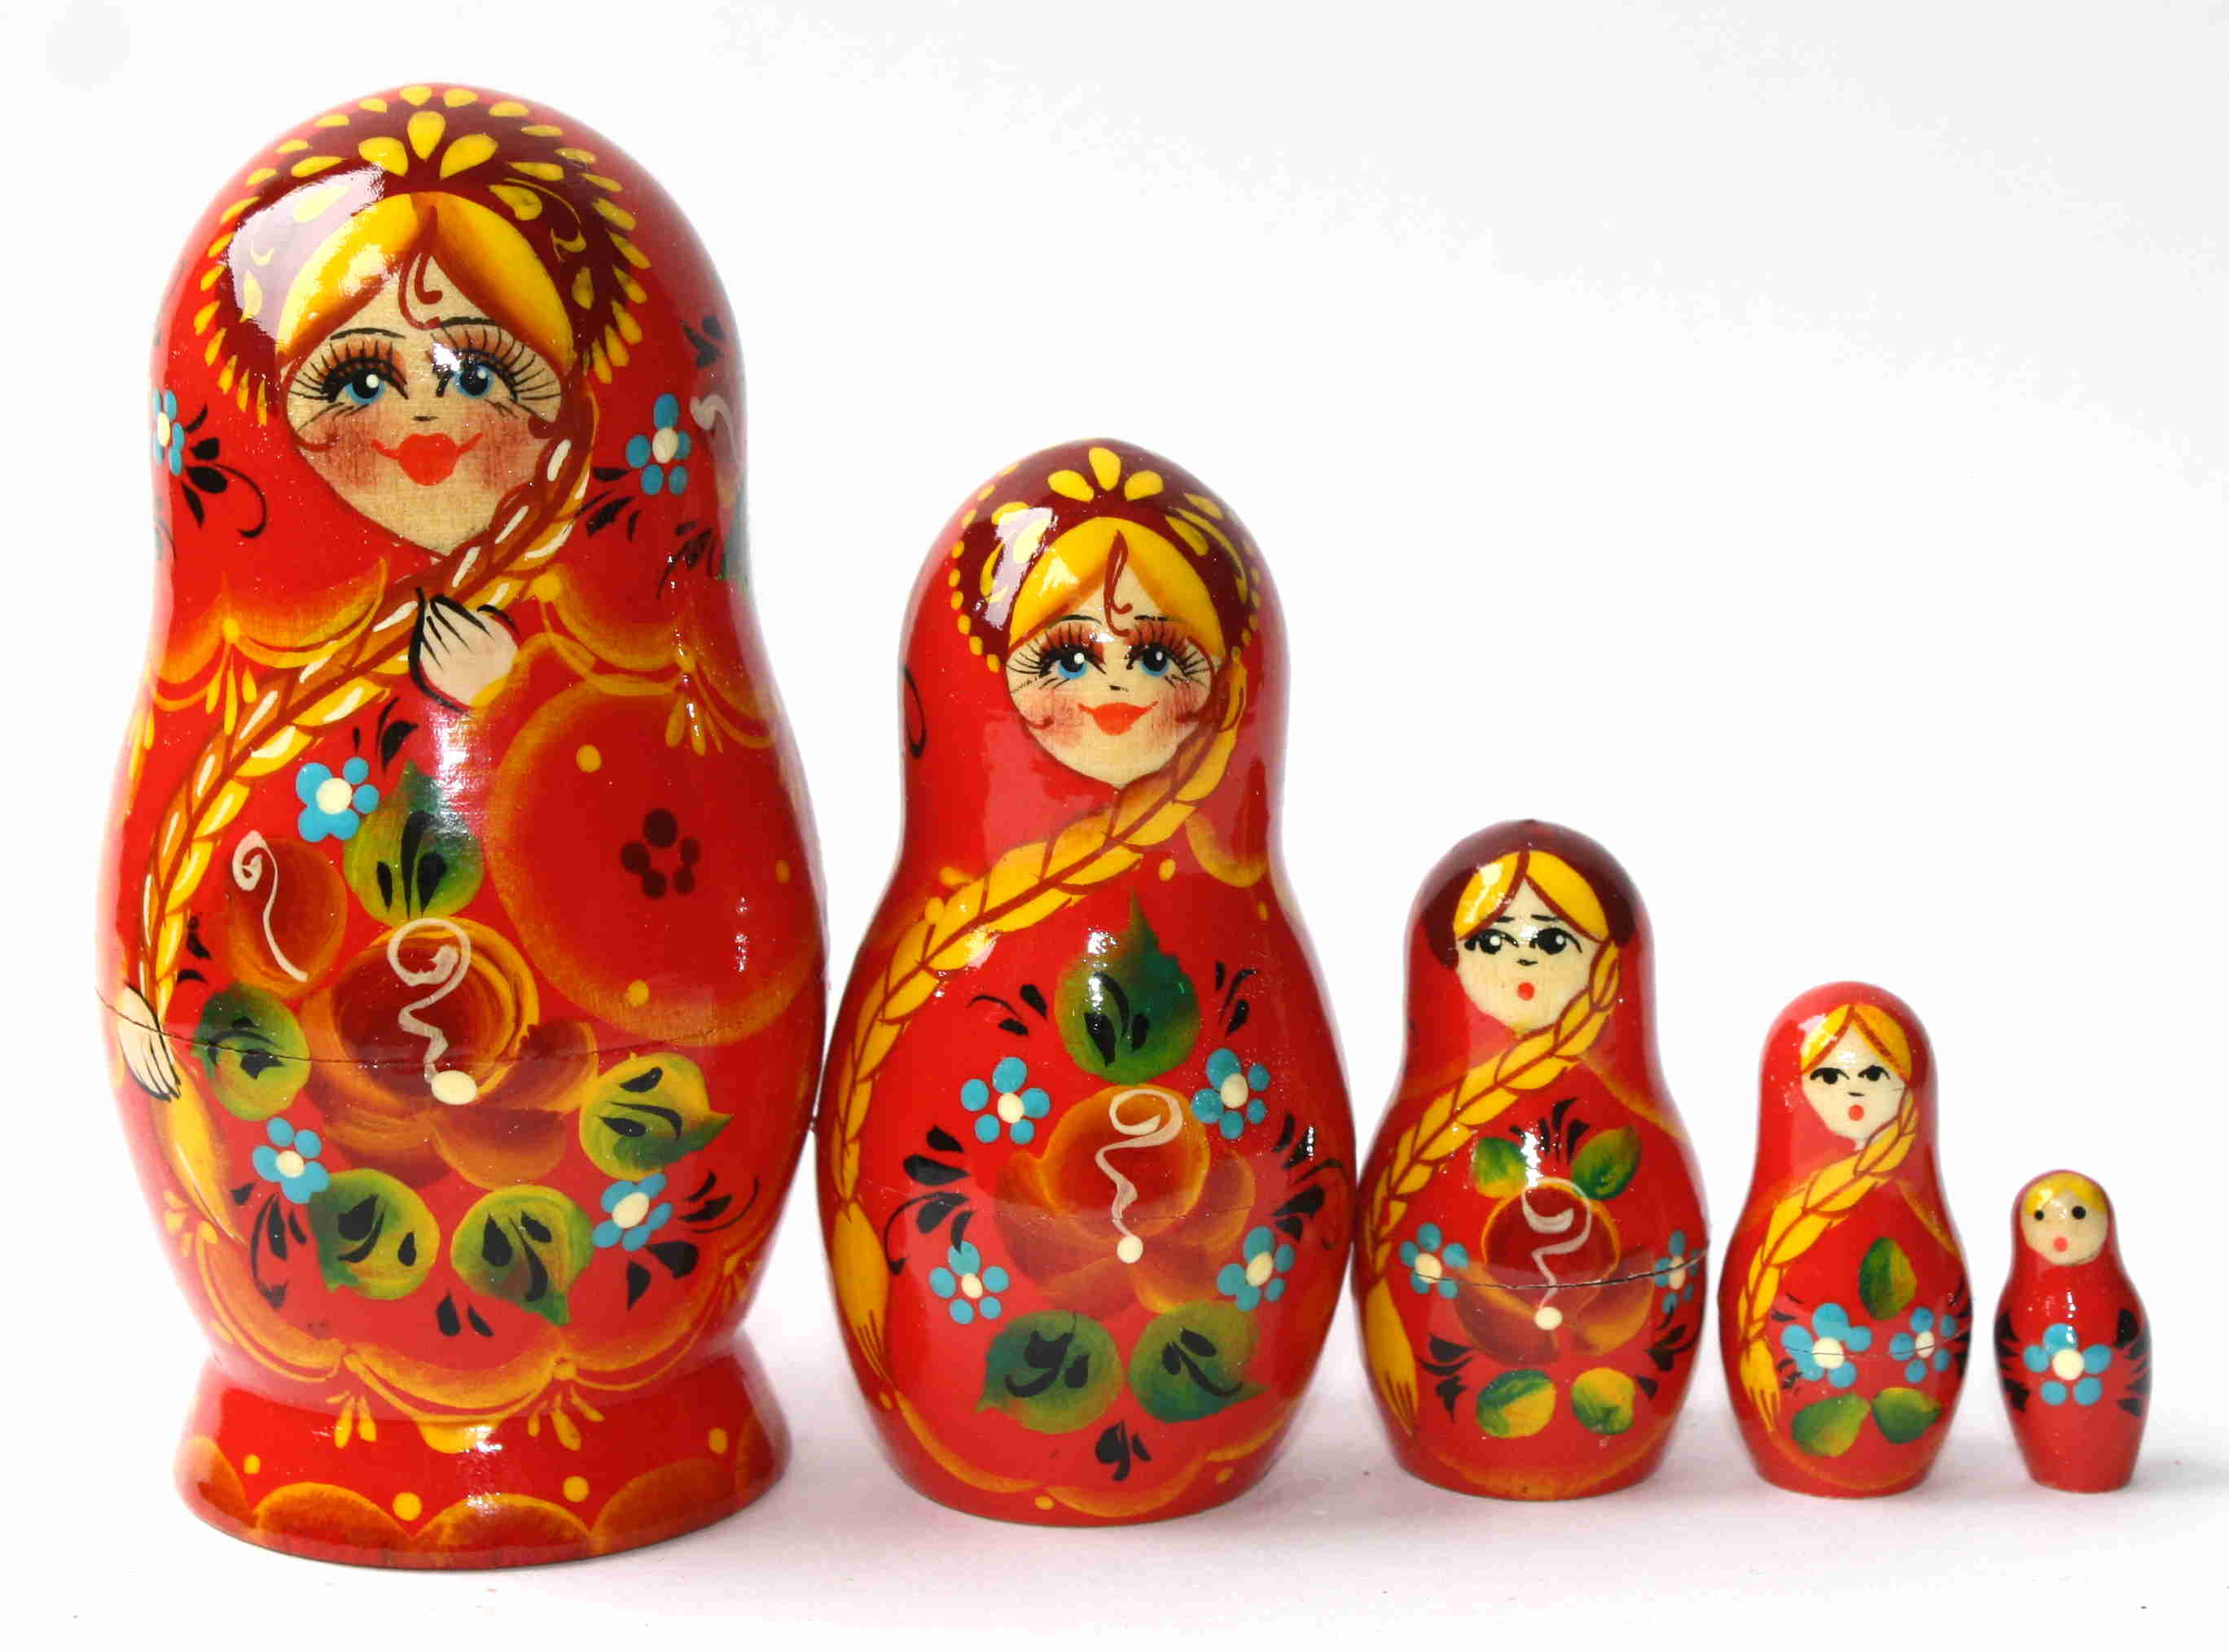 Artists Matryoshka Red girl with flowers and plait (5 nested set)